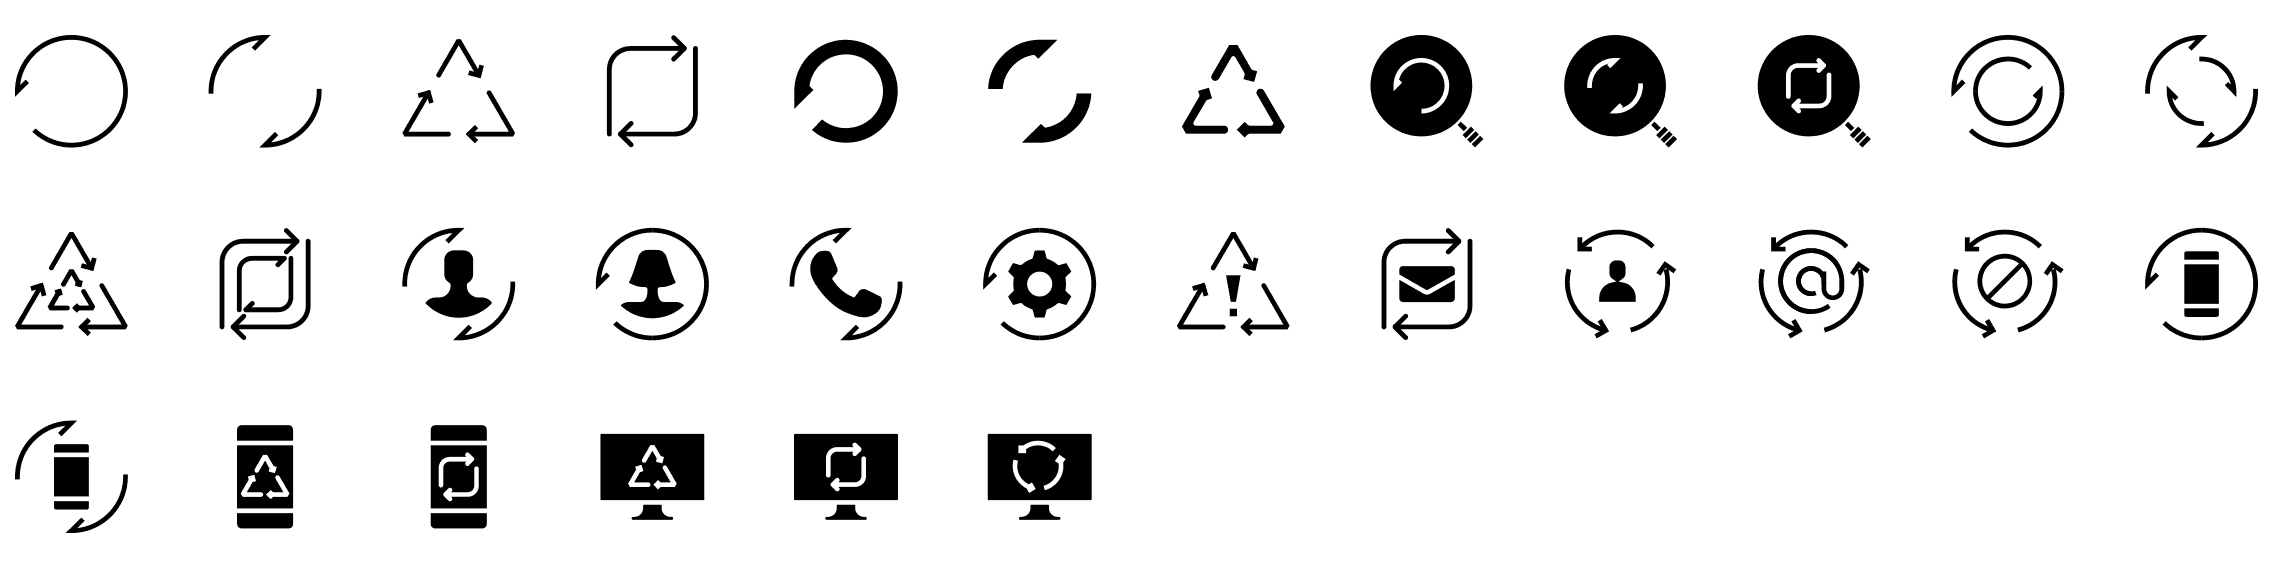 sync-glyph-icons-preview